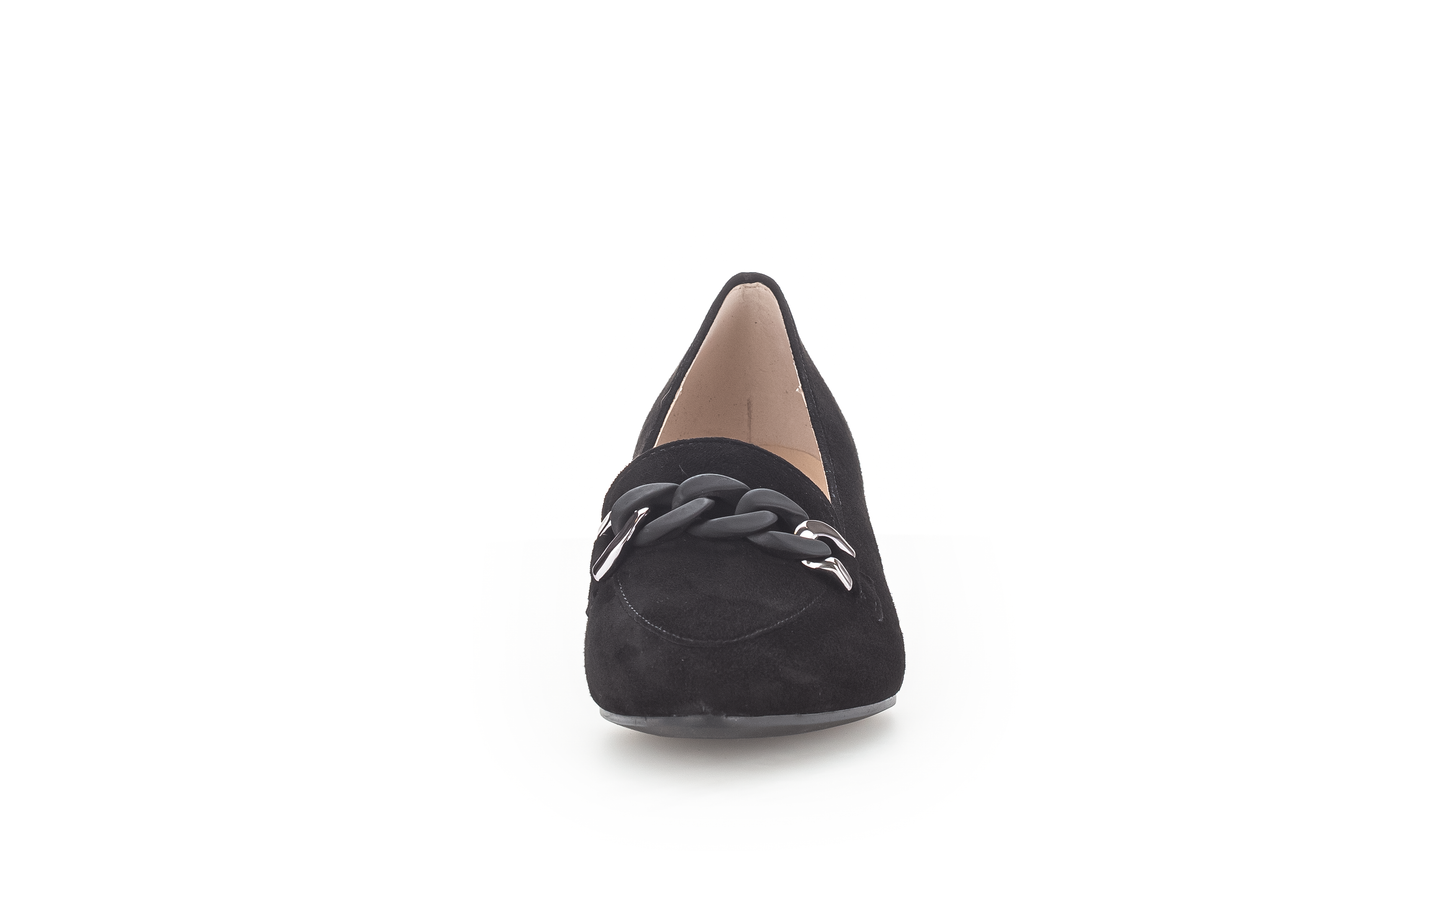 Gabor 91.441.17 Black Suede Slip On Pumps with Black Chain Detailing